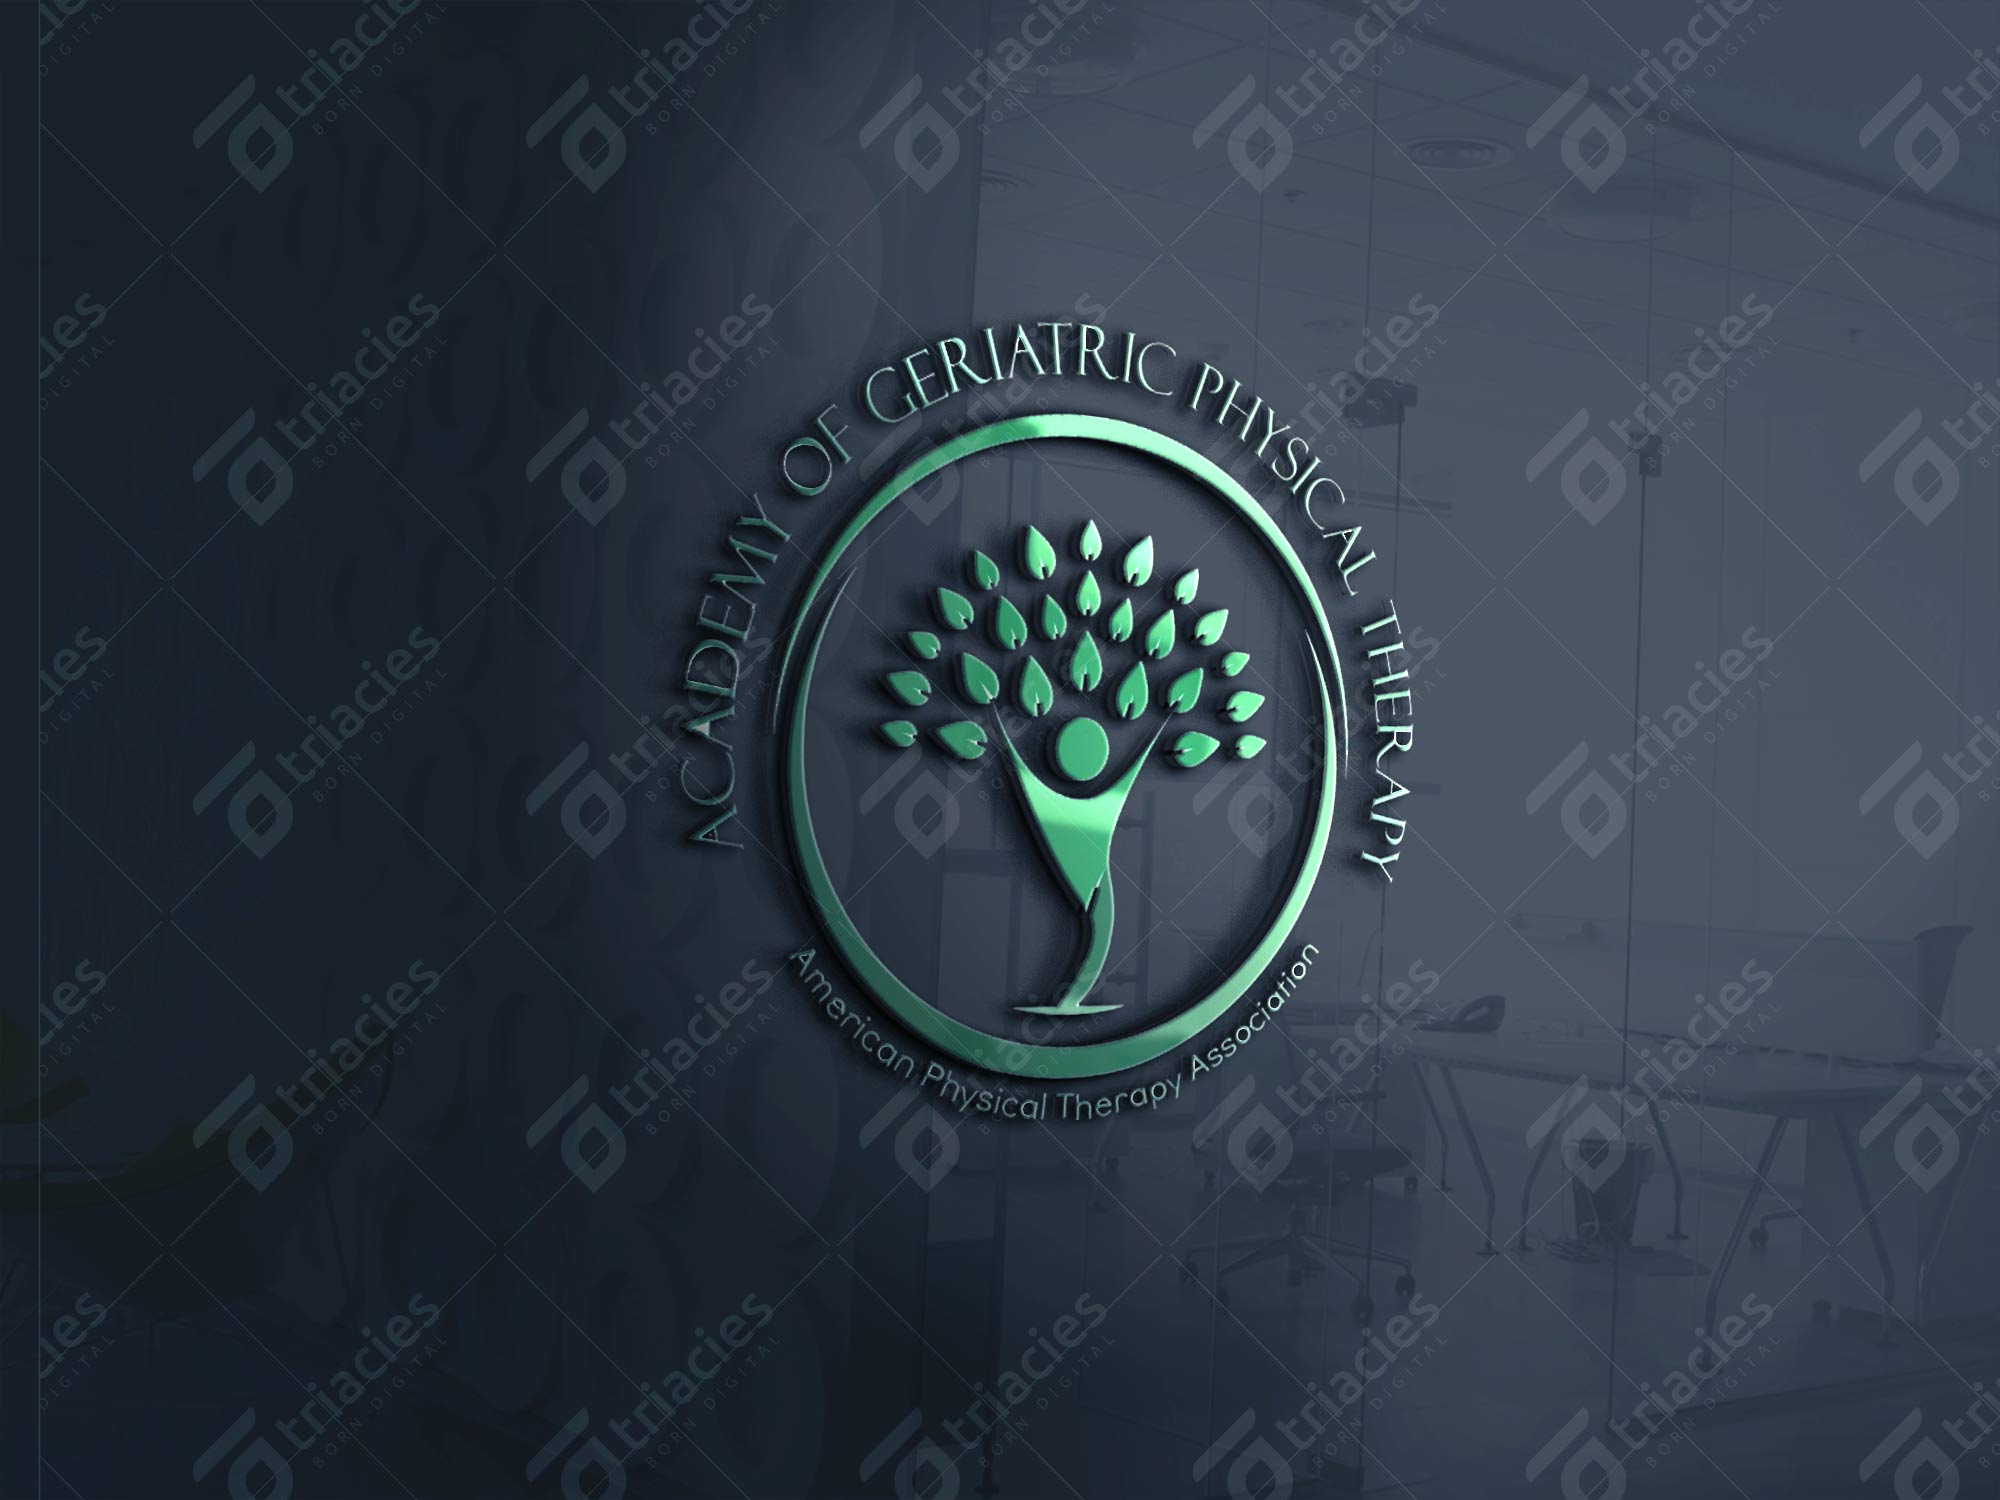 American Physical Therapy Association Logo - Triacies | Logo Design for American Physical Therapy Association